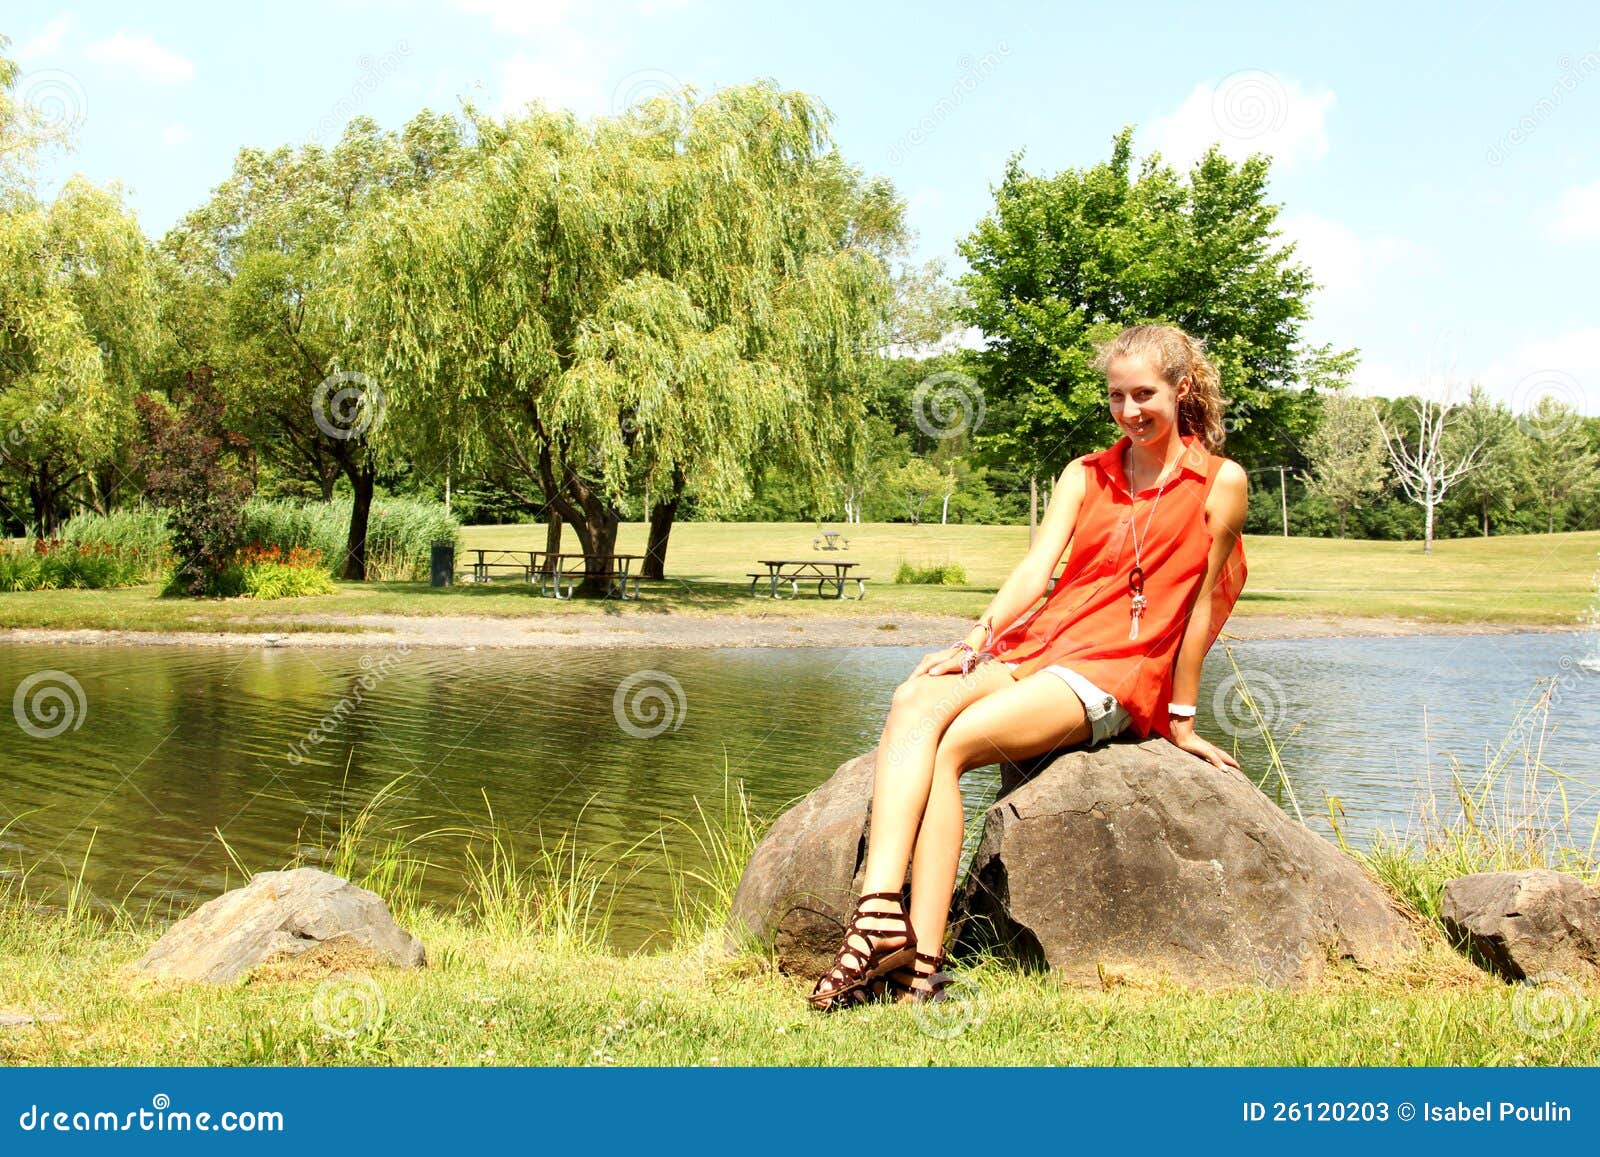 Teen in a park stock image